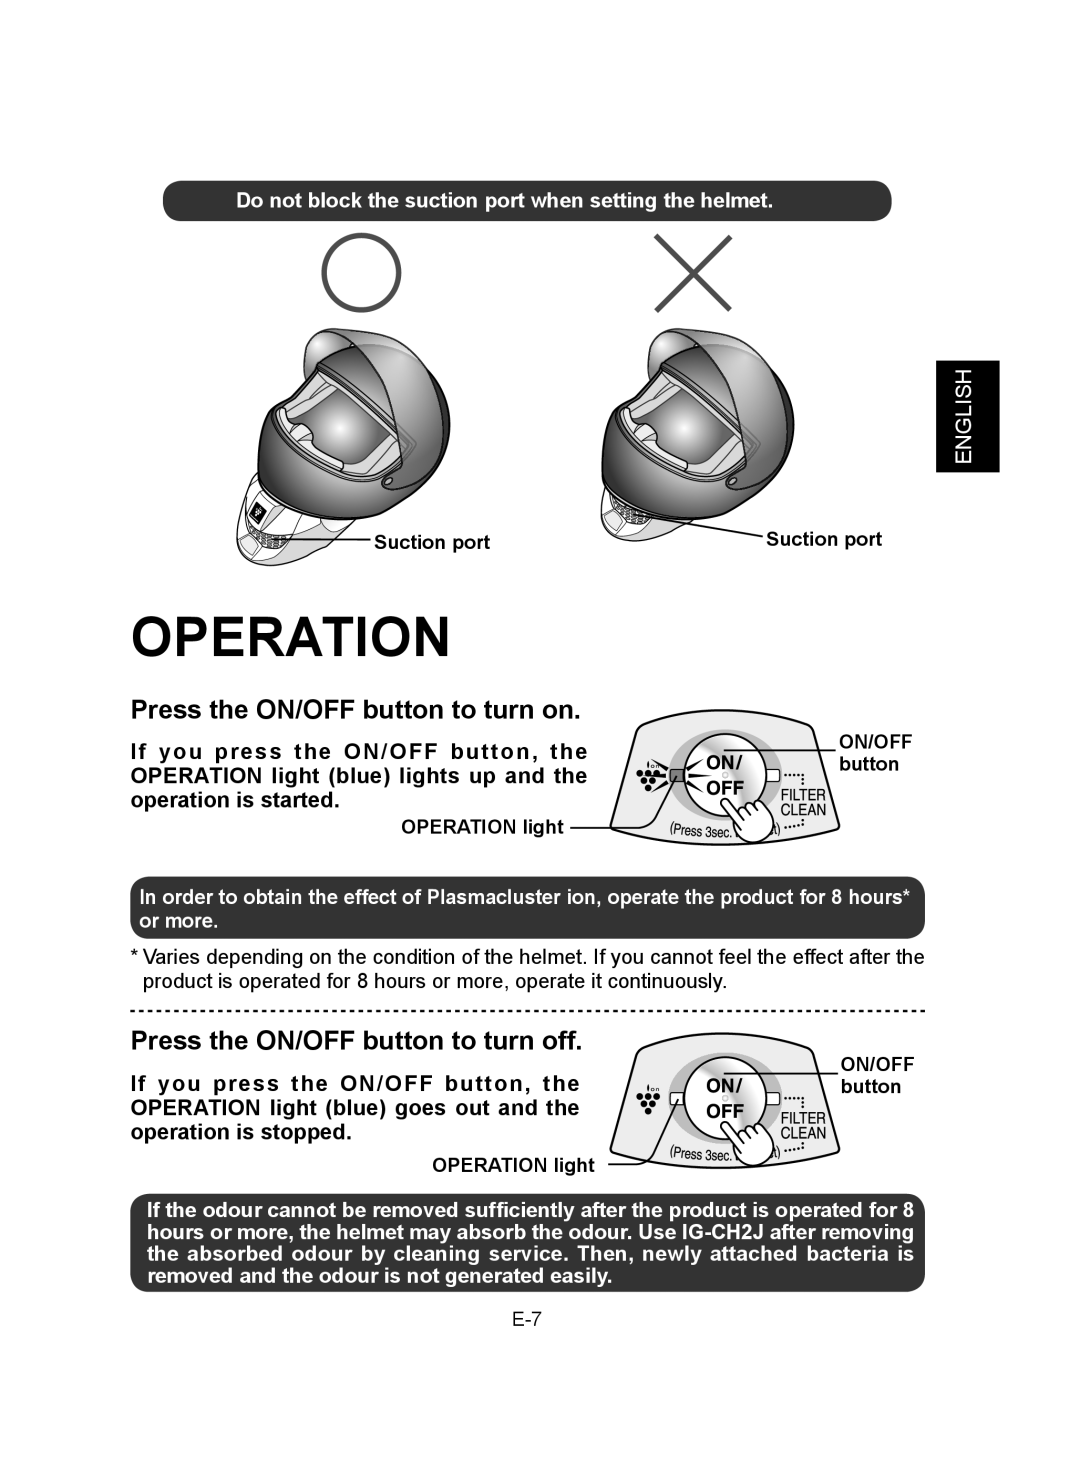 Sharp IG-CH2J operation manual Operation, Press the ON/OFF button to turn on, Press the ON/OFF button to turn off, English 